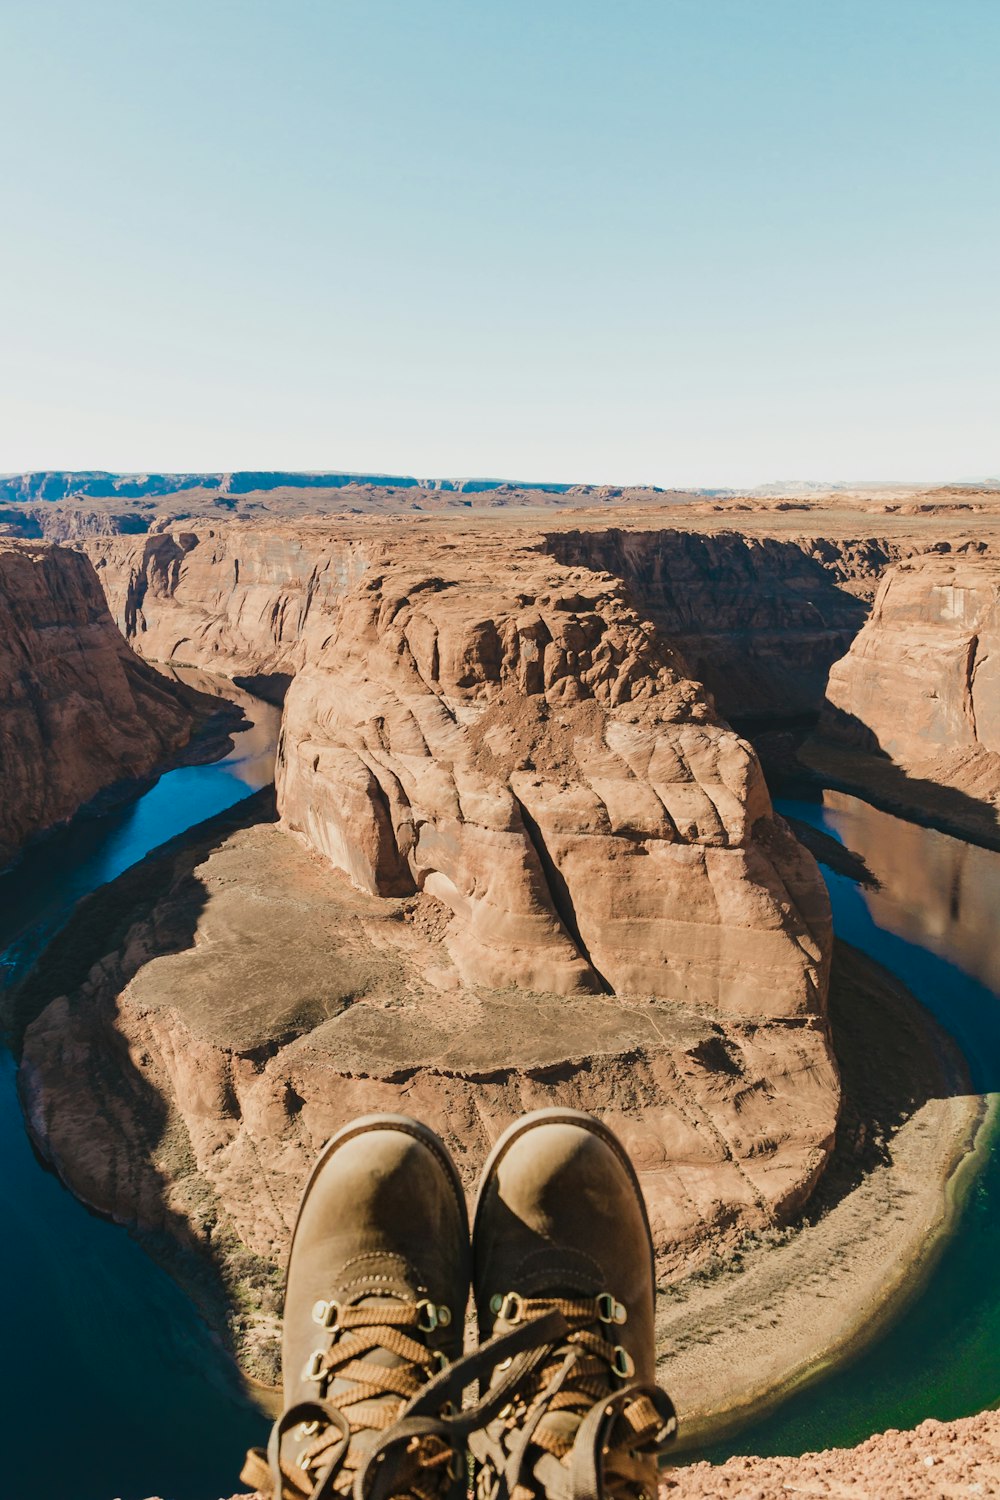 person wearing brown leather boots at Horseshoe bend, Arizona during daytime